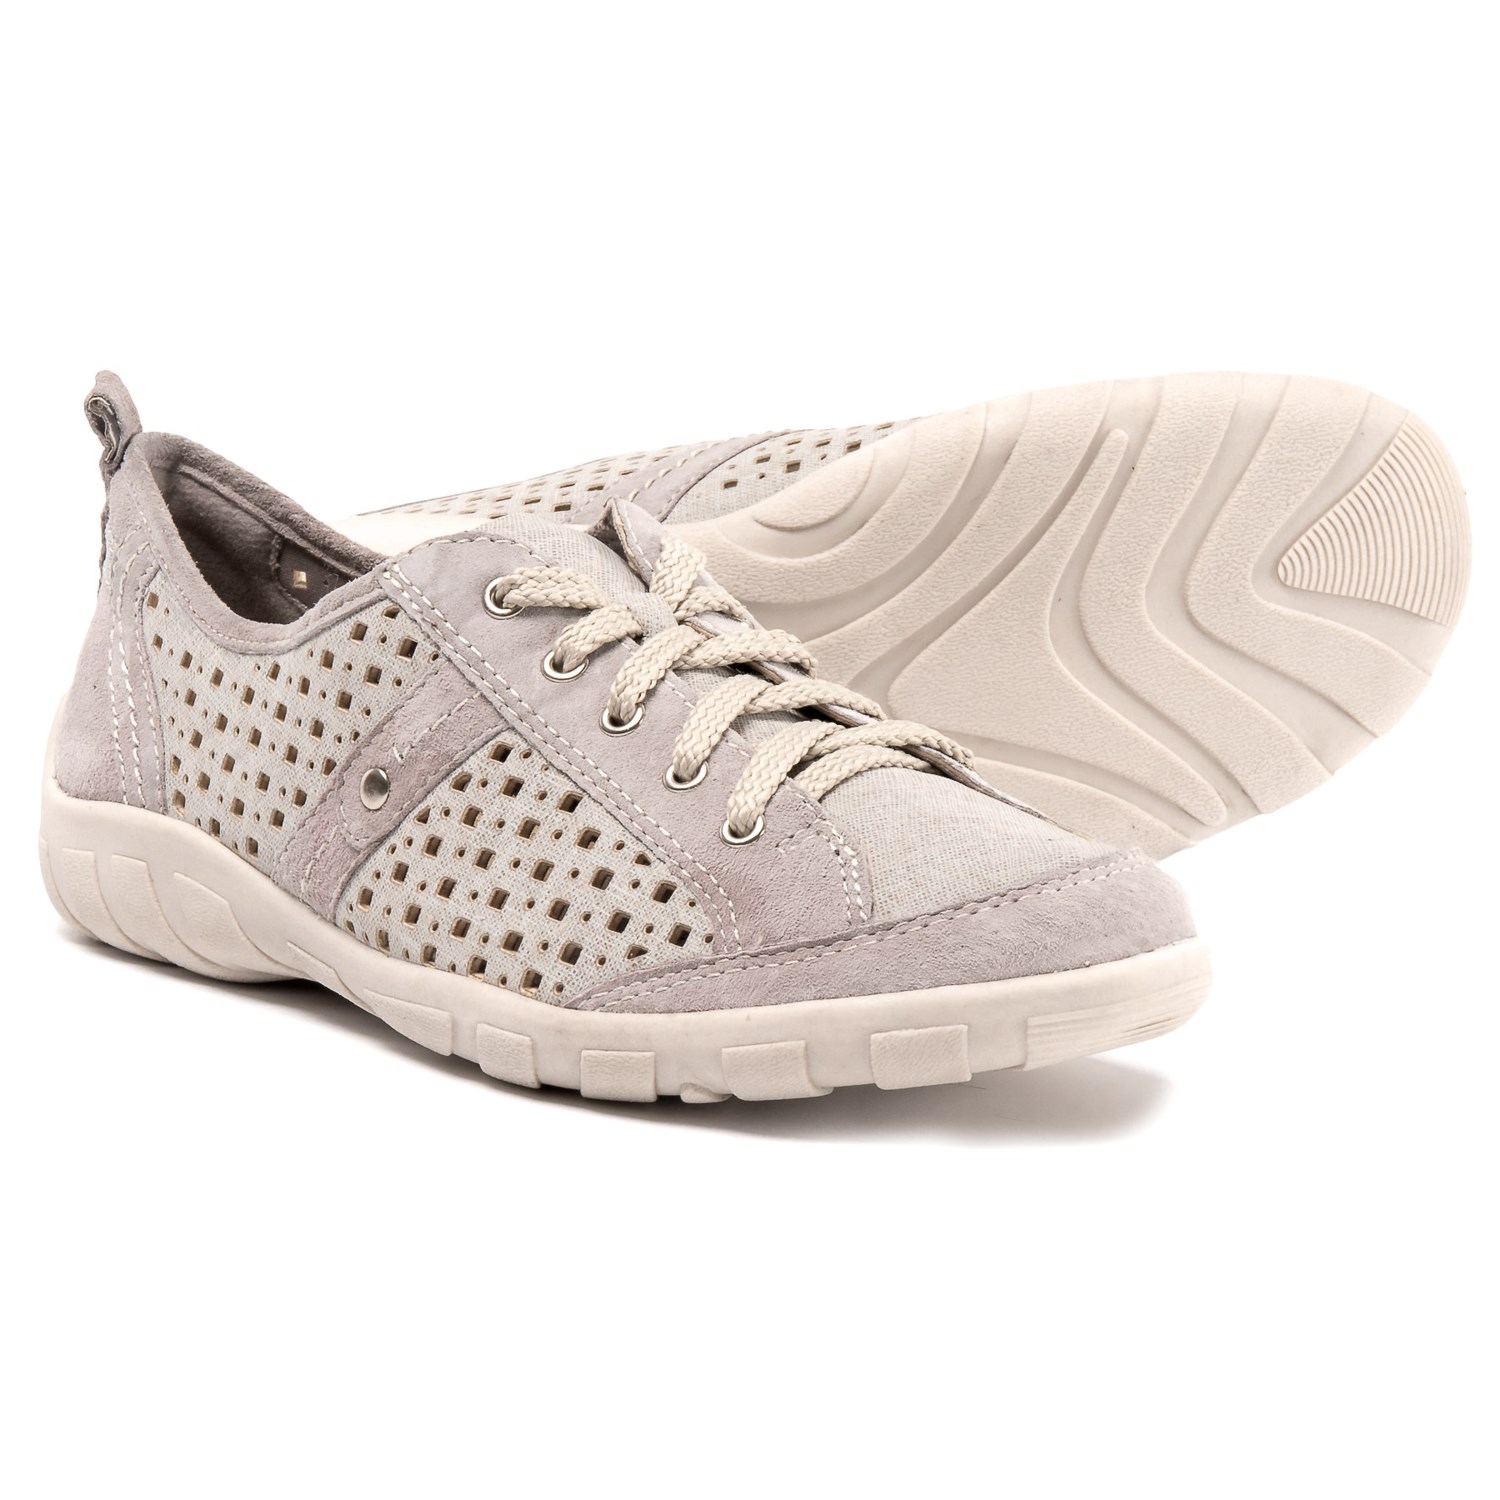 Earth Origins Wooly Perforated Leather Sneakers (For Women)